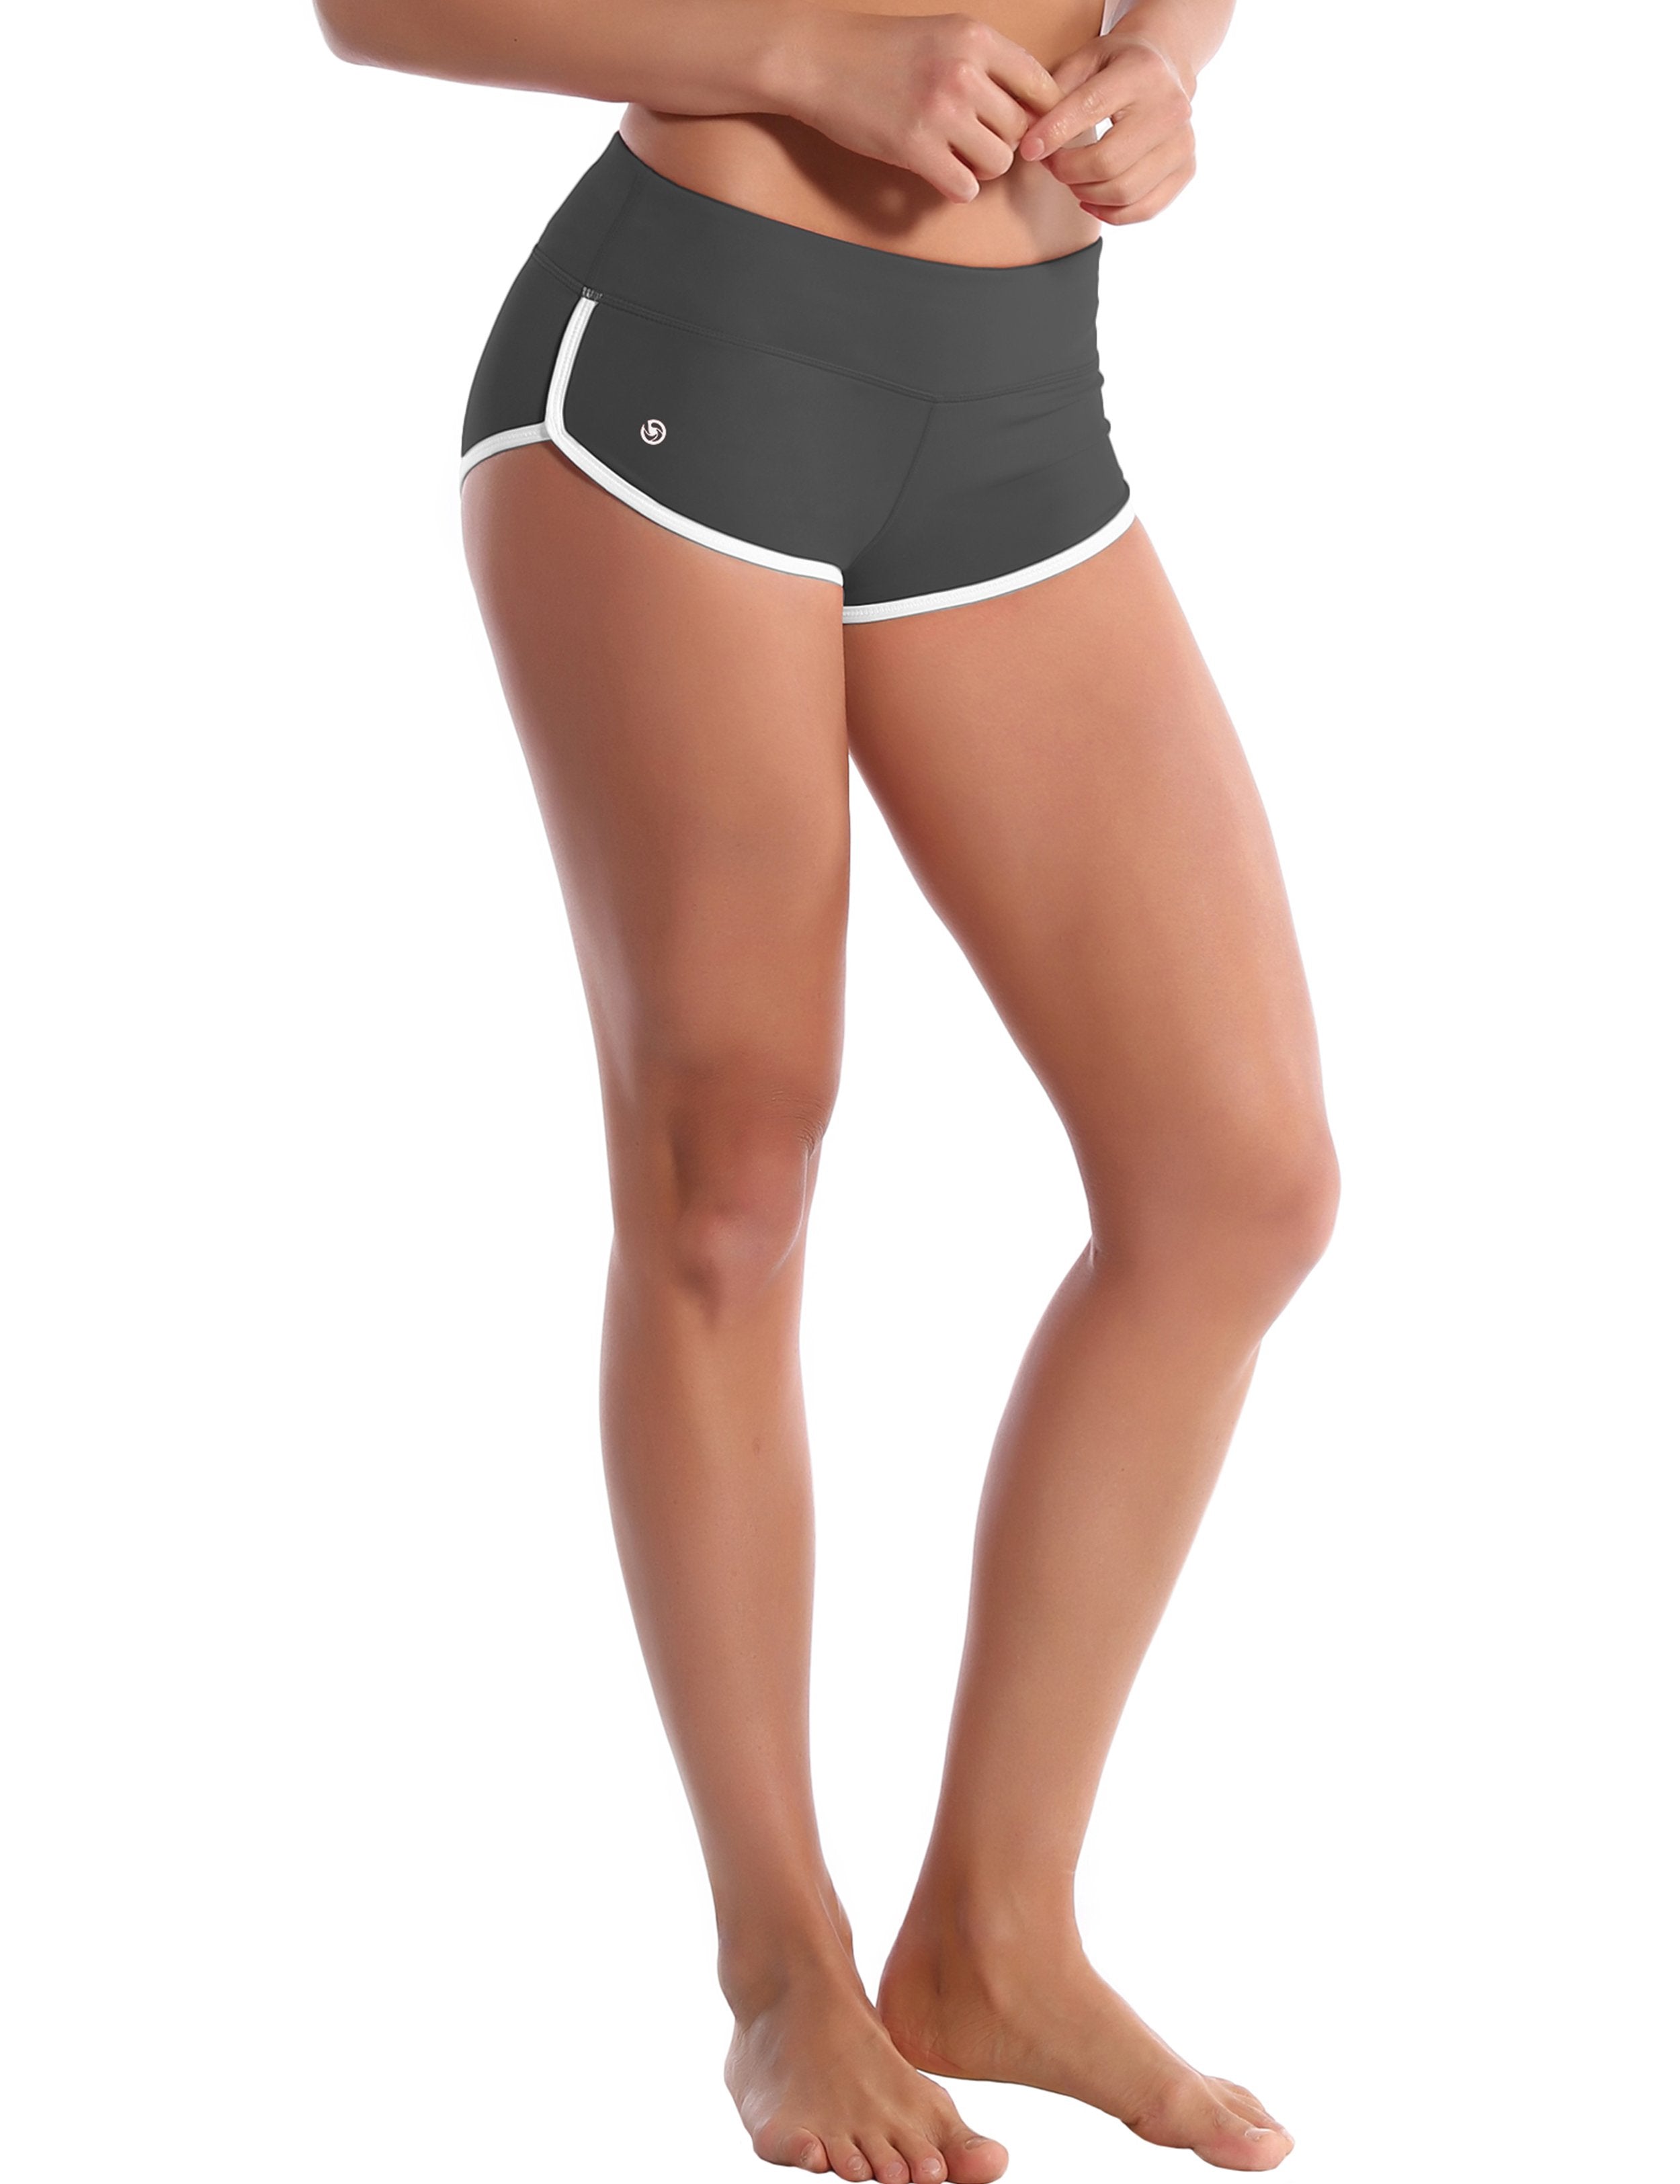 Sexy Booty Jogging Shorts shadowcharcoal Sleek, soft, smooth and totally comfortable: our newest sexy style is here. Softest-ever fabric High elasticity High density 4-way stretch Fabric doesn't attract lint easily No see-through Moisture-wicking Machine wash 75%Nylon/25%Spandex